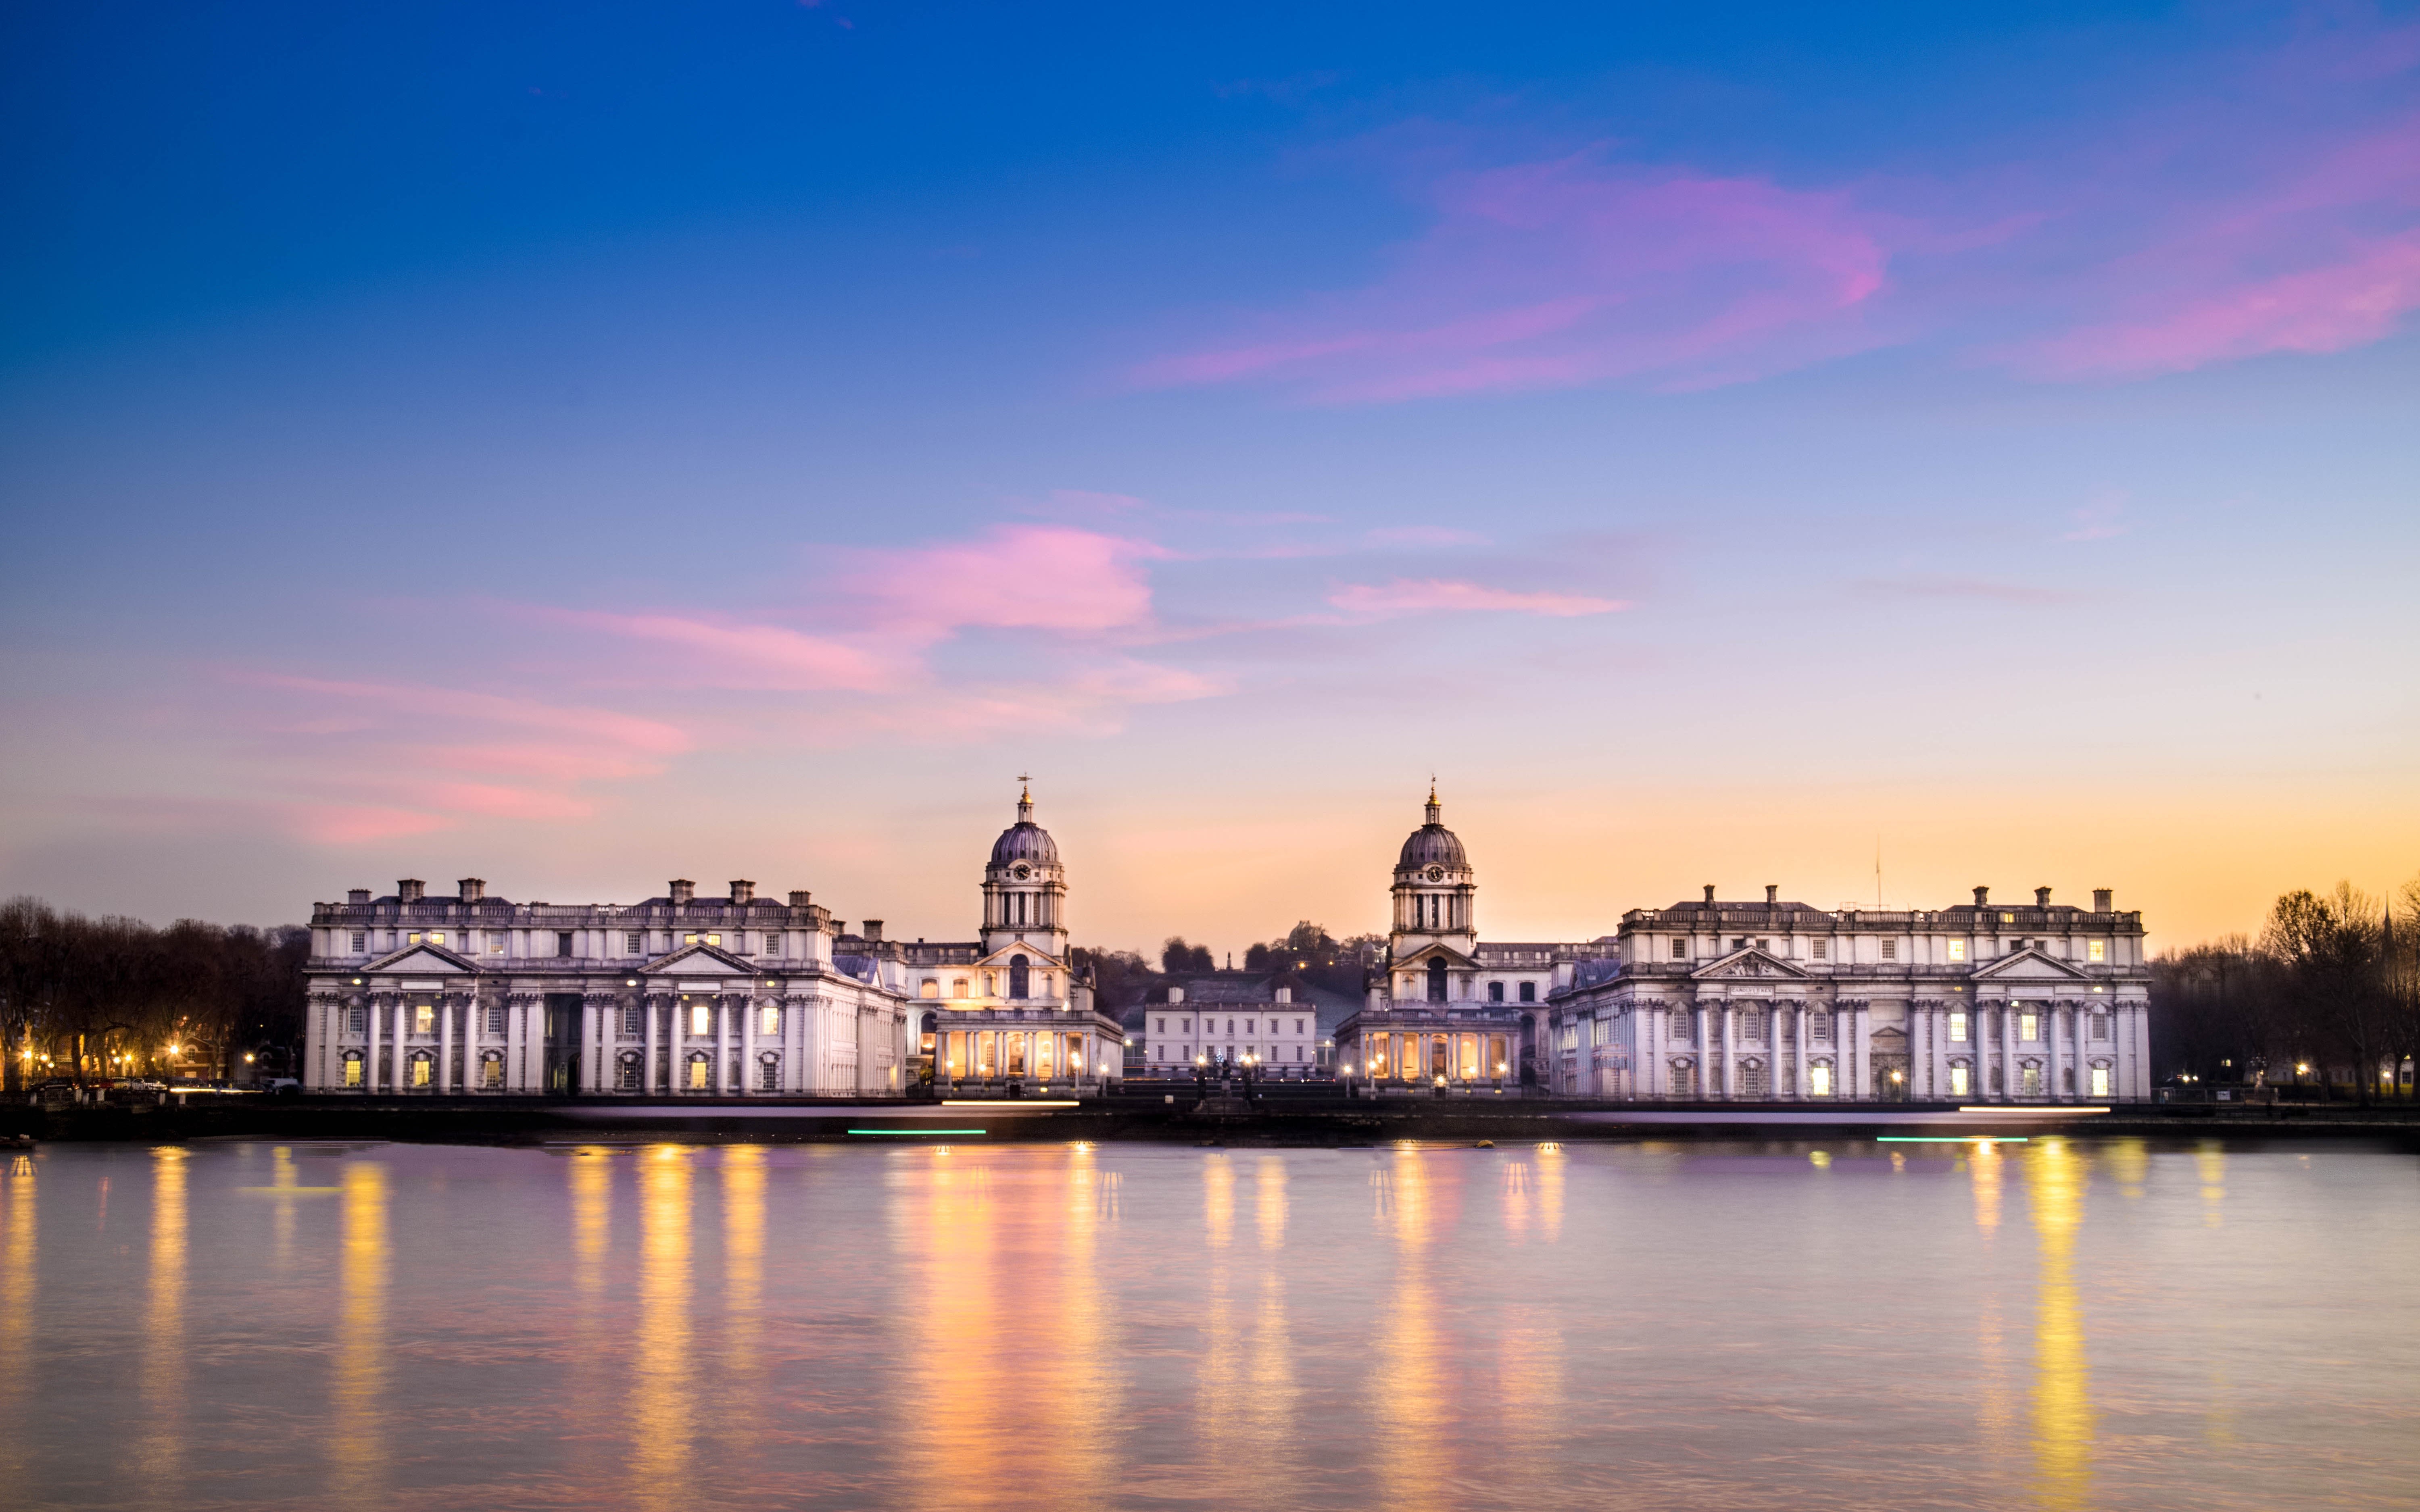 Image of Old Royal Naval College in Greenwich, London. 